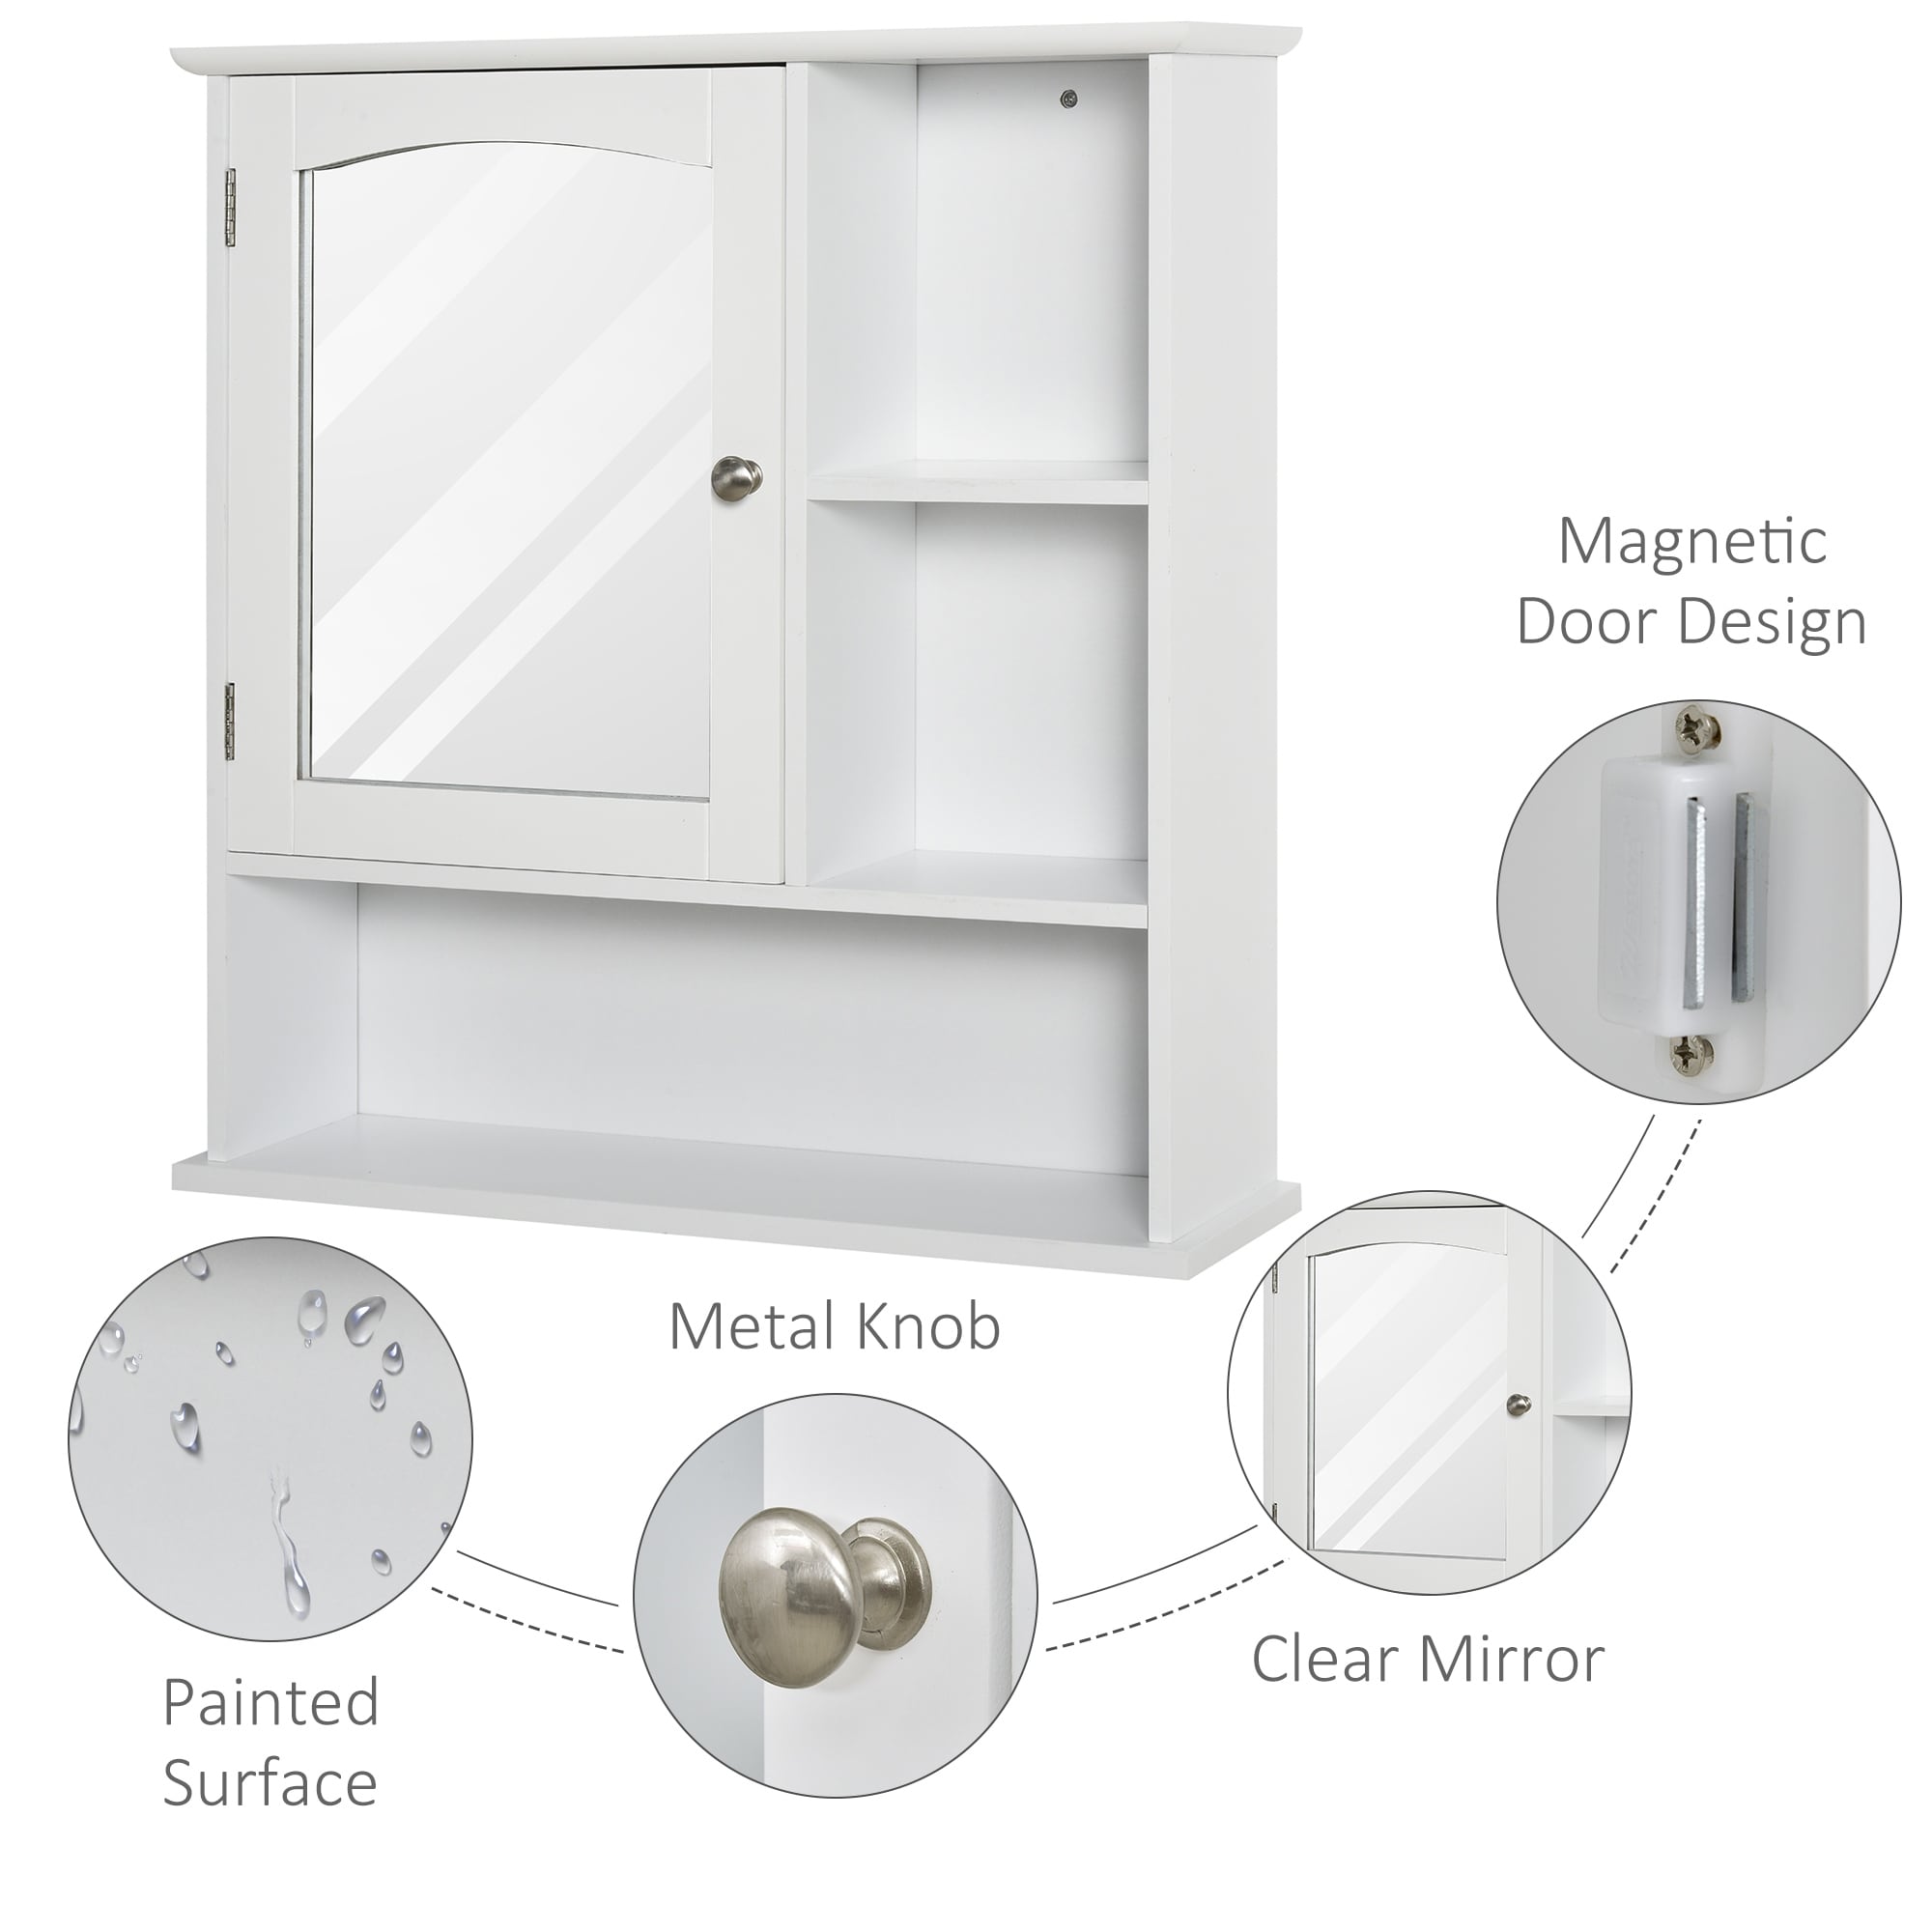 https://ak1.ostkcdn.com/images/products/is/images/direct/73fc4691cbfe96e506118b07fb3bc0c36baeea60/kleankin-Wall-Mounted-Bathroom-Storage-Cabinet-Organizer-with-Mirror%2C-Adjustable-Shelf%2C-and-Magnetic-Door-Design%2C-White.jpg